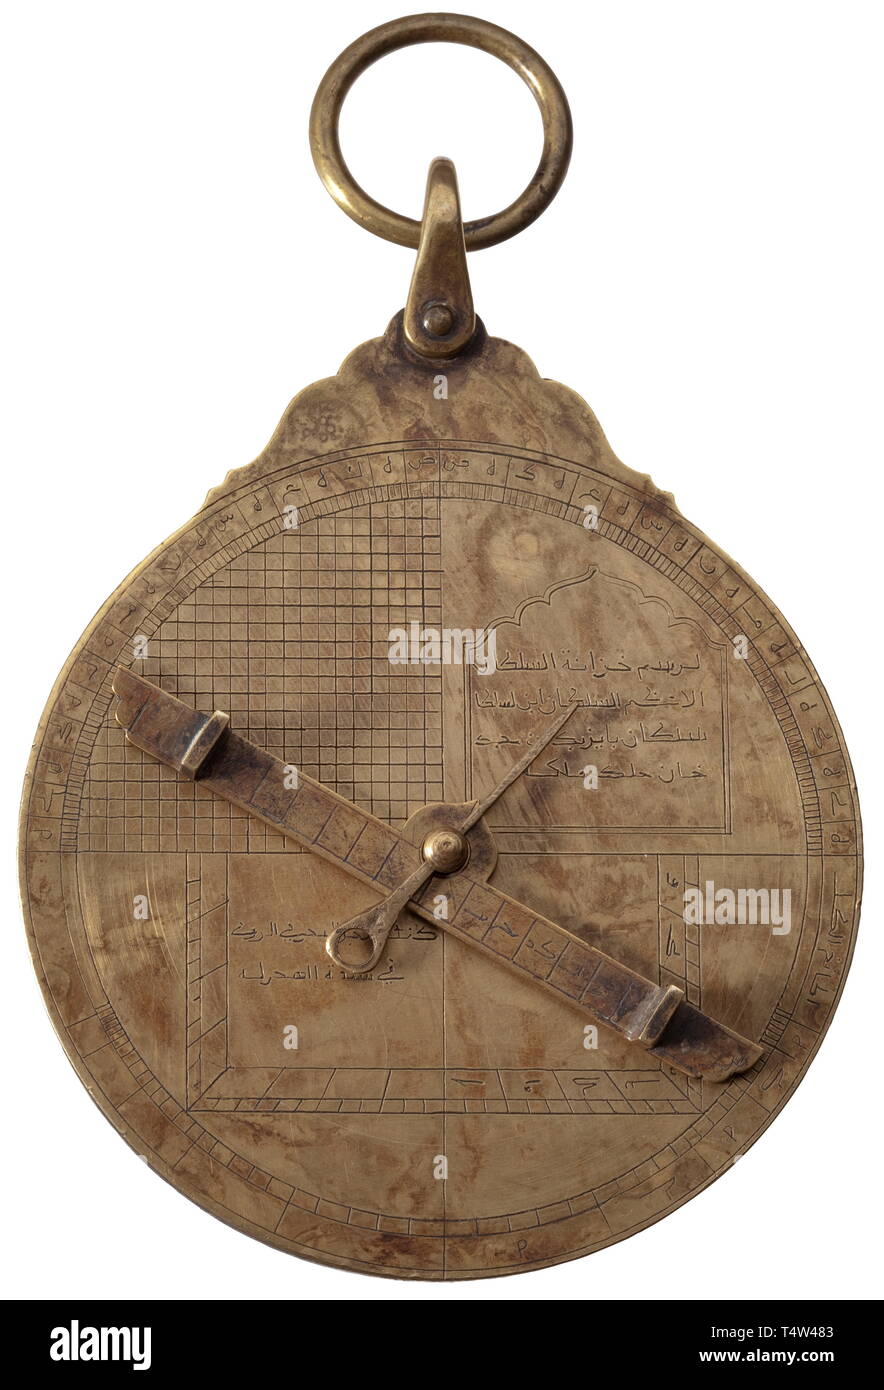 A Persian astrolabe, 18th century. Solid brass housing with engraved inscription along the front perimeter. Three finely engraved plate-shaped disks inside, one with the maker's signature. Engraved and pierced cover decorated with four silver rivets. Engraved inscriptions on the reverse with movable pin-fastened bridge. Sturdy loop with suspension ring. Superbly crafted. Height 13 cm. historic, historical, Persian, Orient, Oriental, Asia, Asian, 18th century, Additional-Rights-Clearance-Info-Not-Available Stock Photo